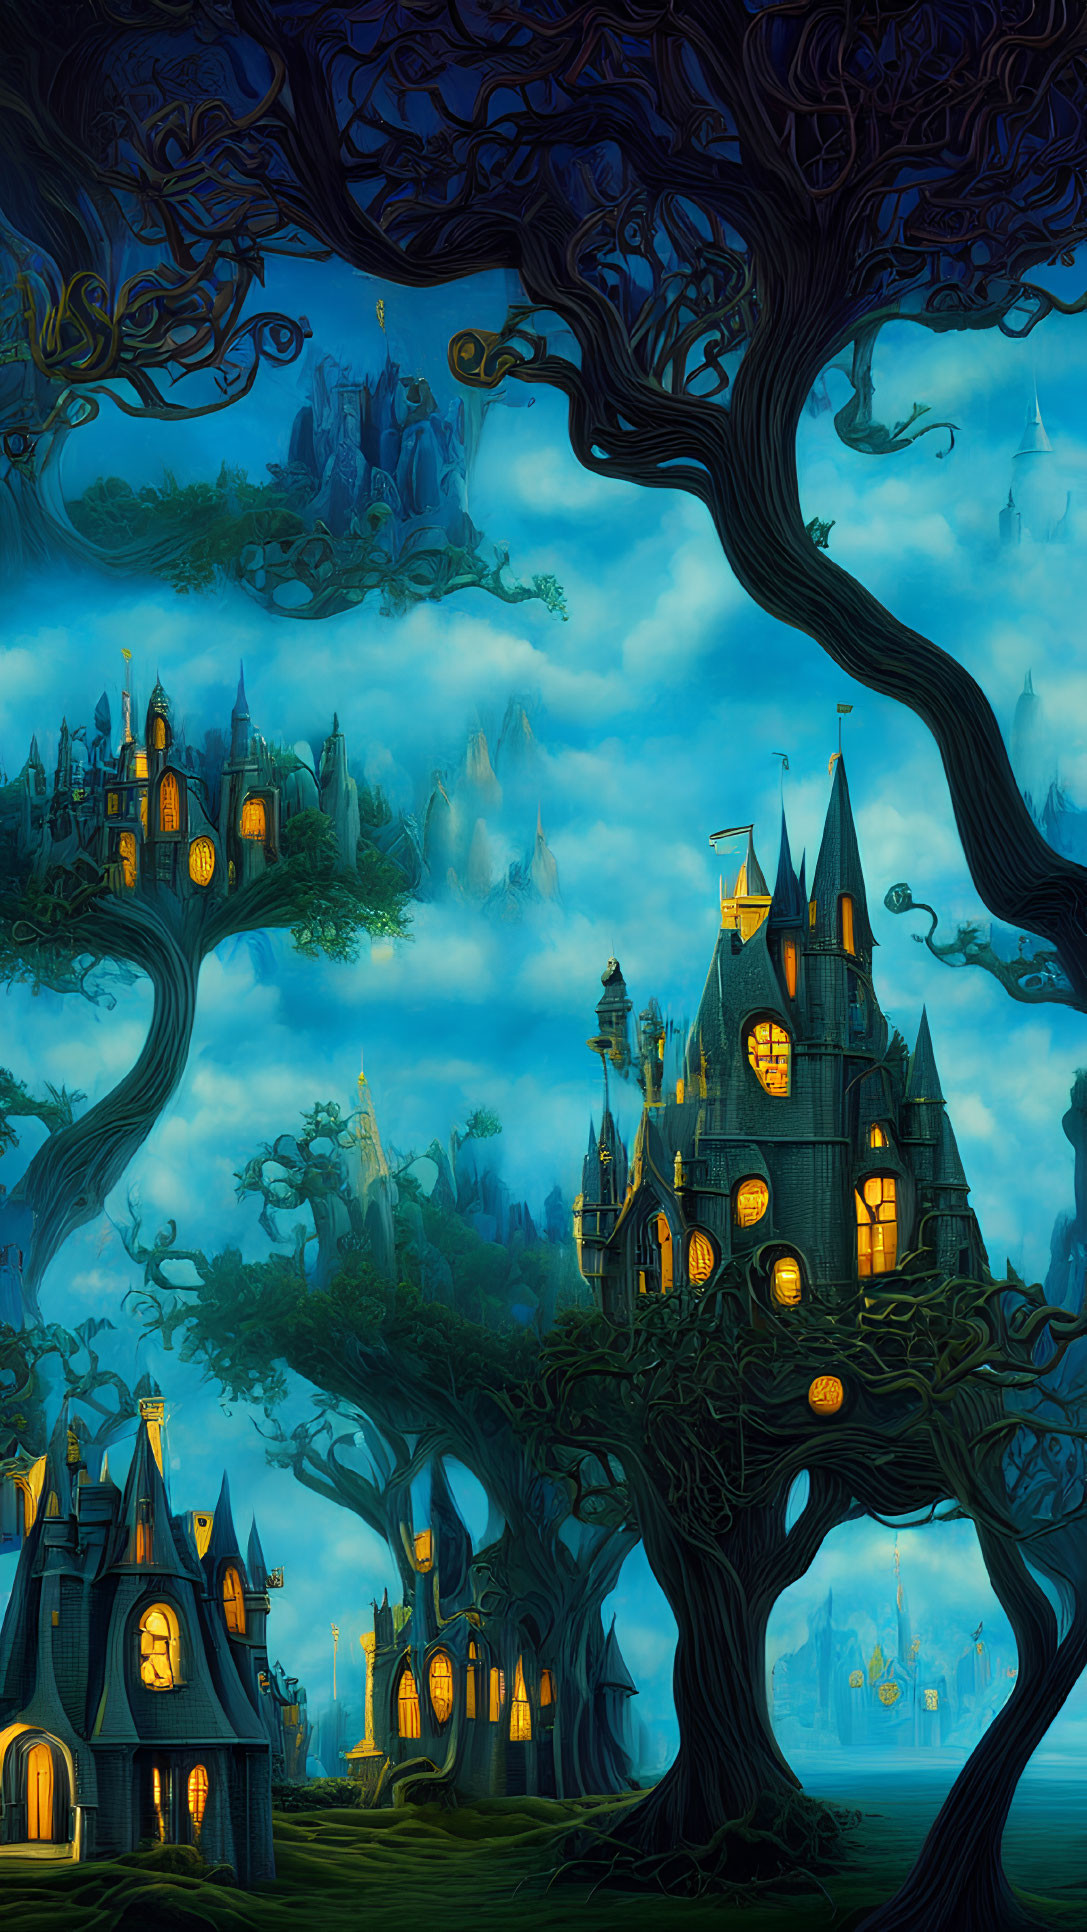 Twisted trees and gothic castles in enchanted evening landscape